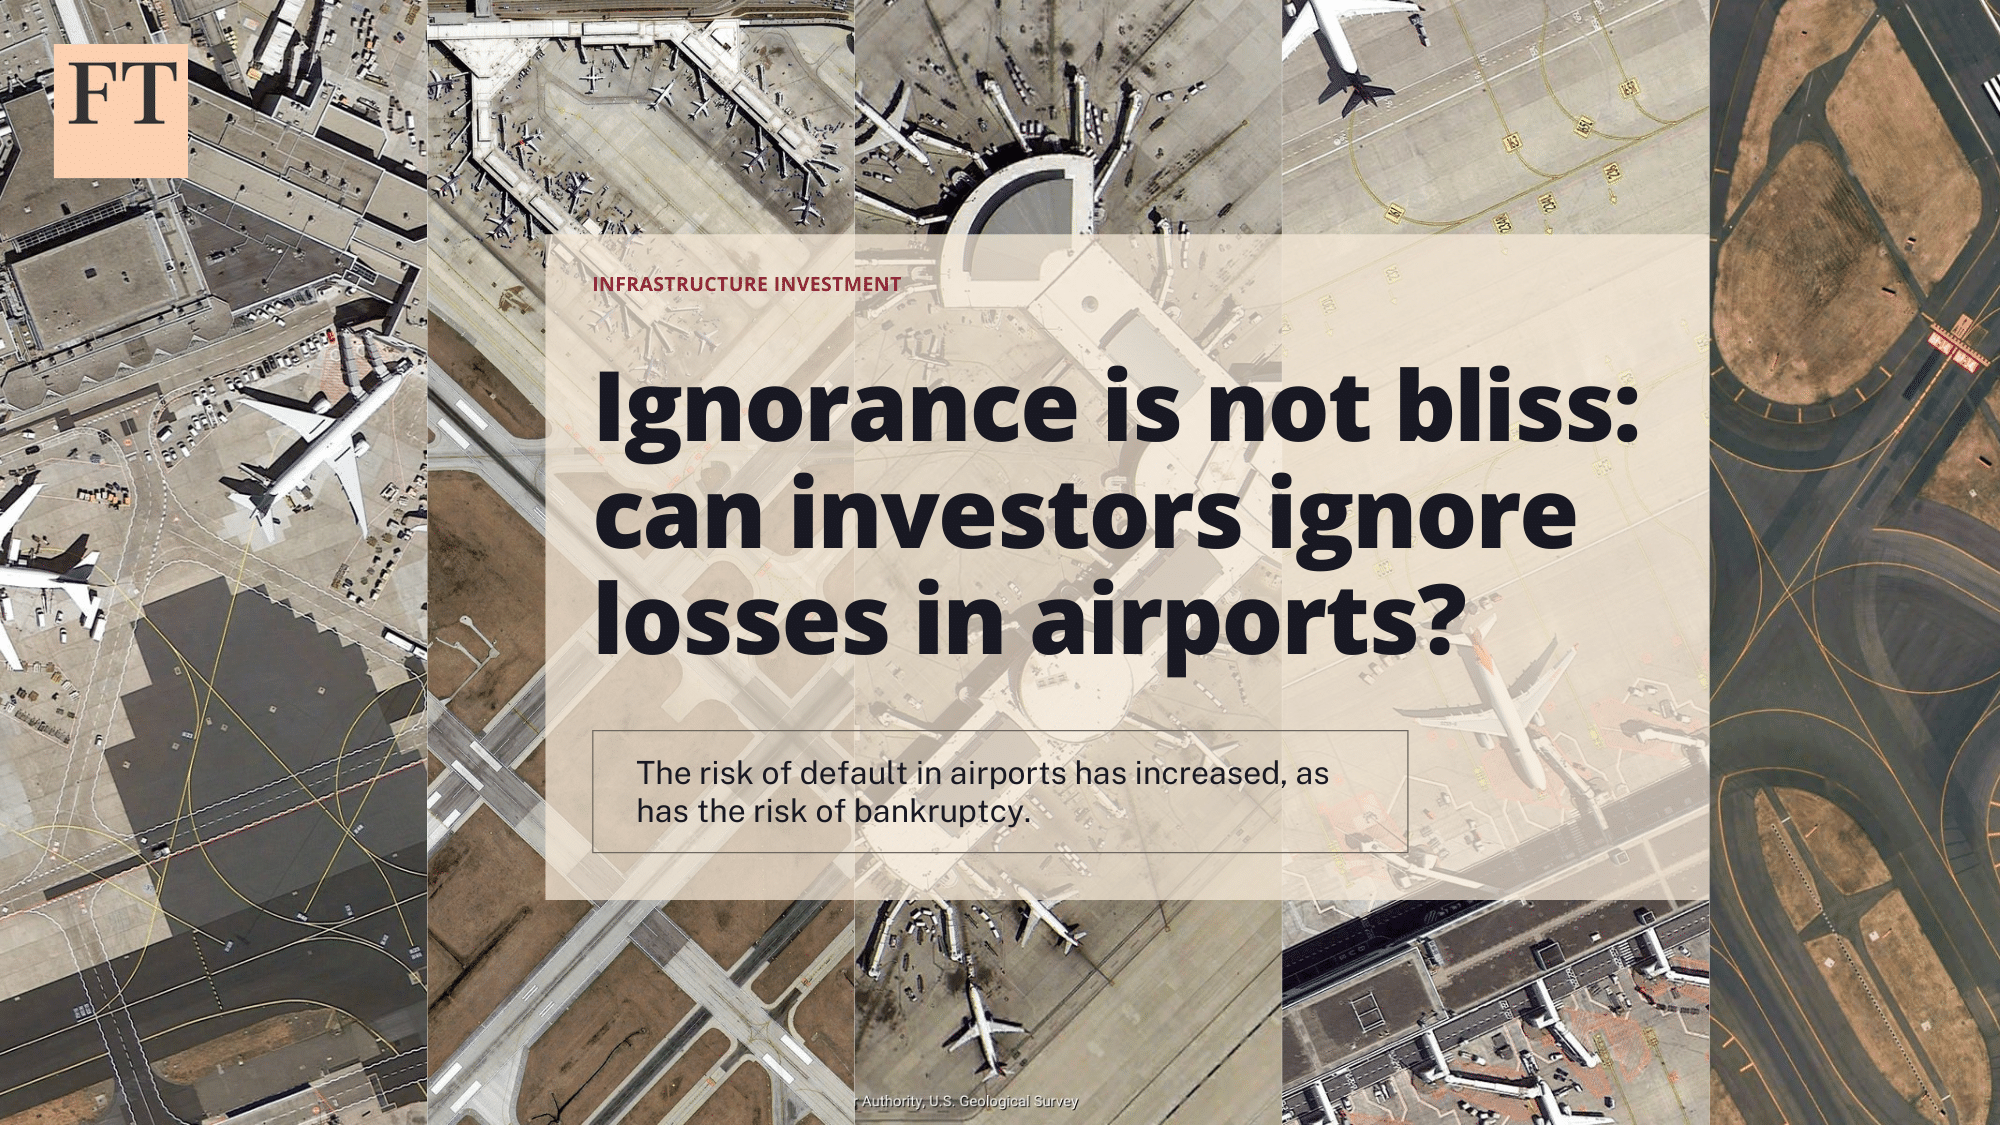 FT: Ignorance is not bliss: can investors ignore losses in airports?